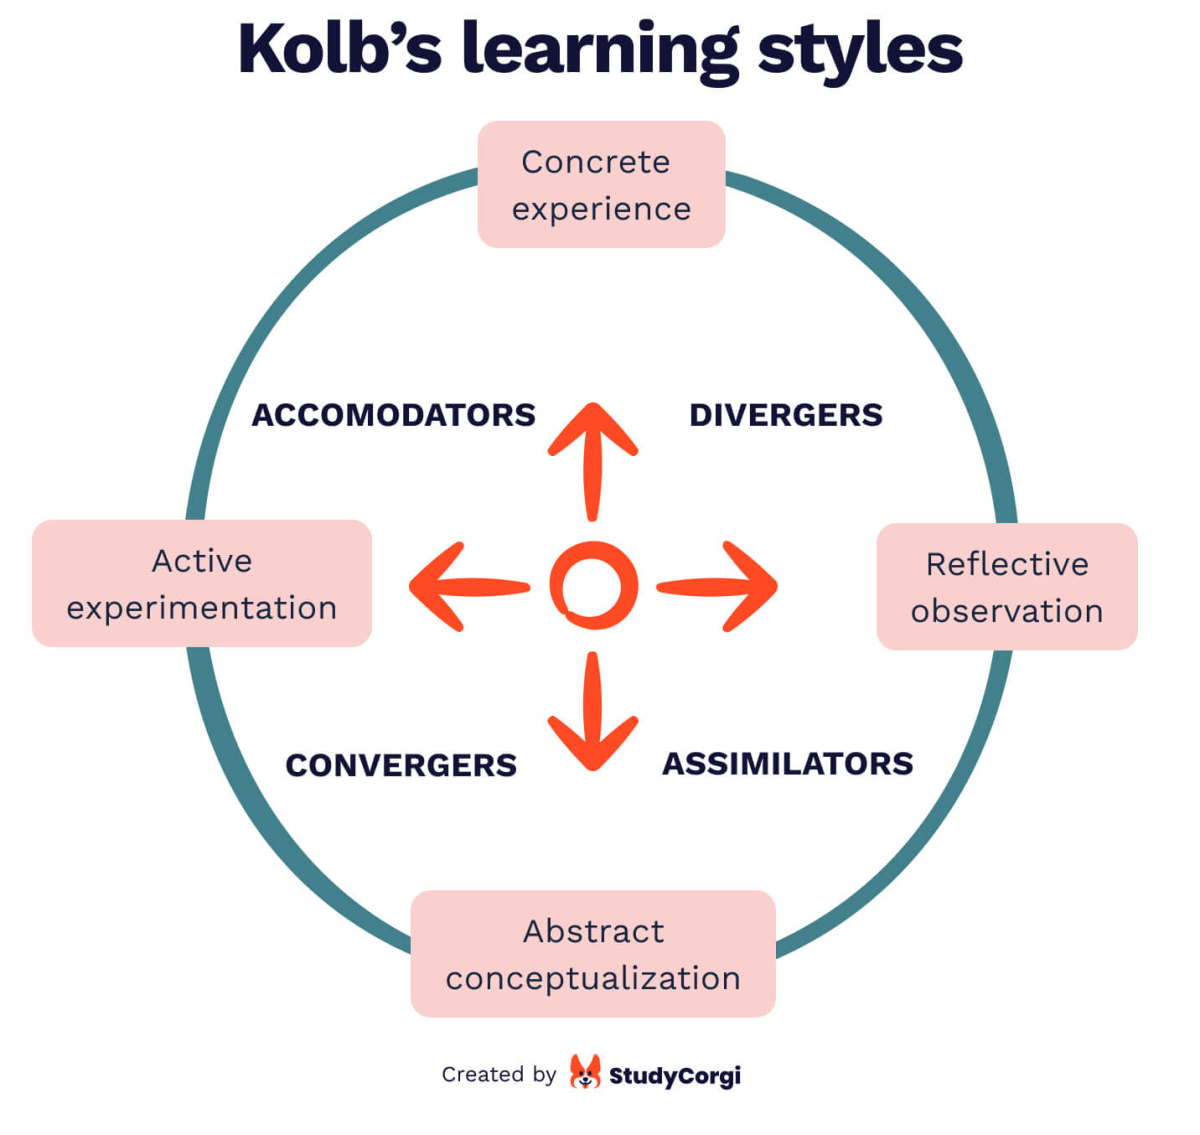 The picture illustrates the concept of Kolb's learning cycle.